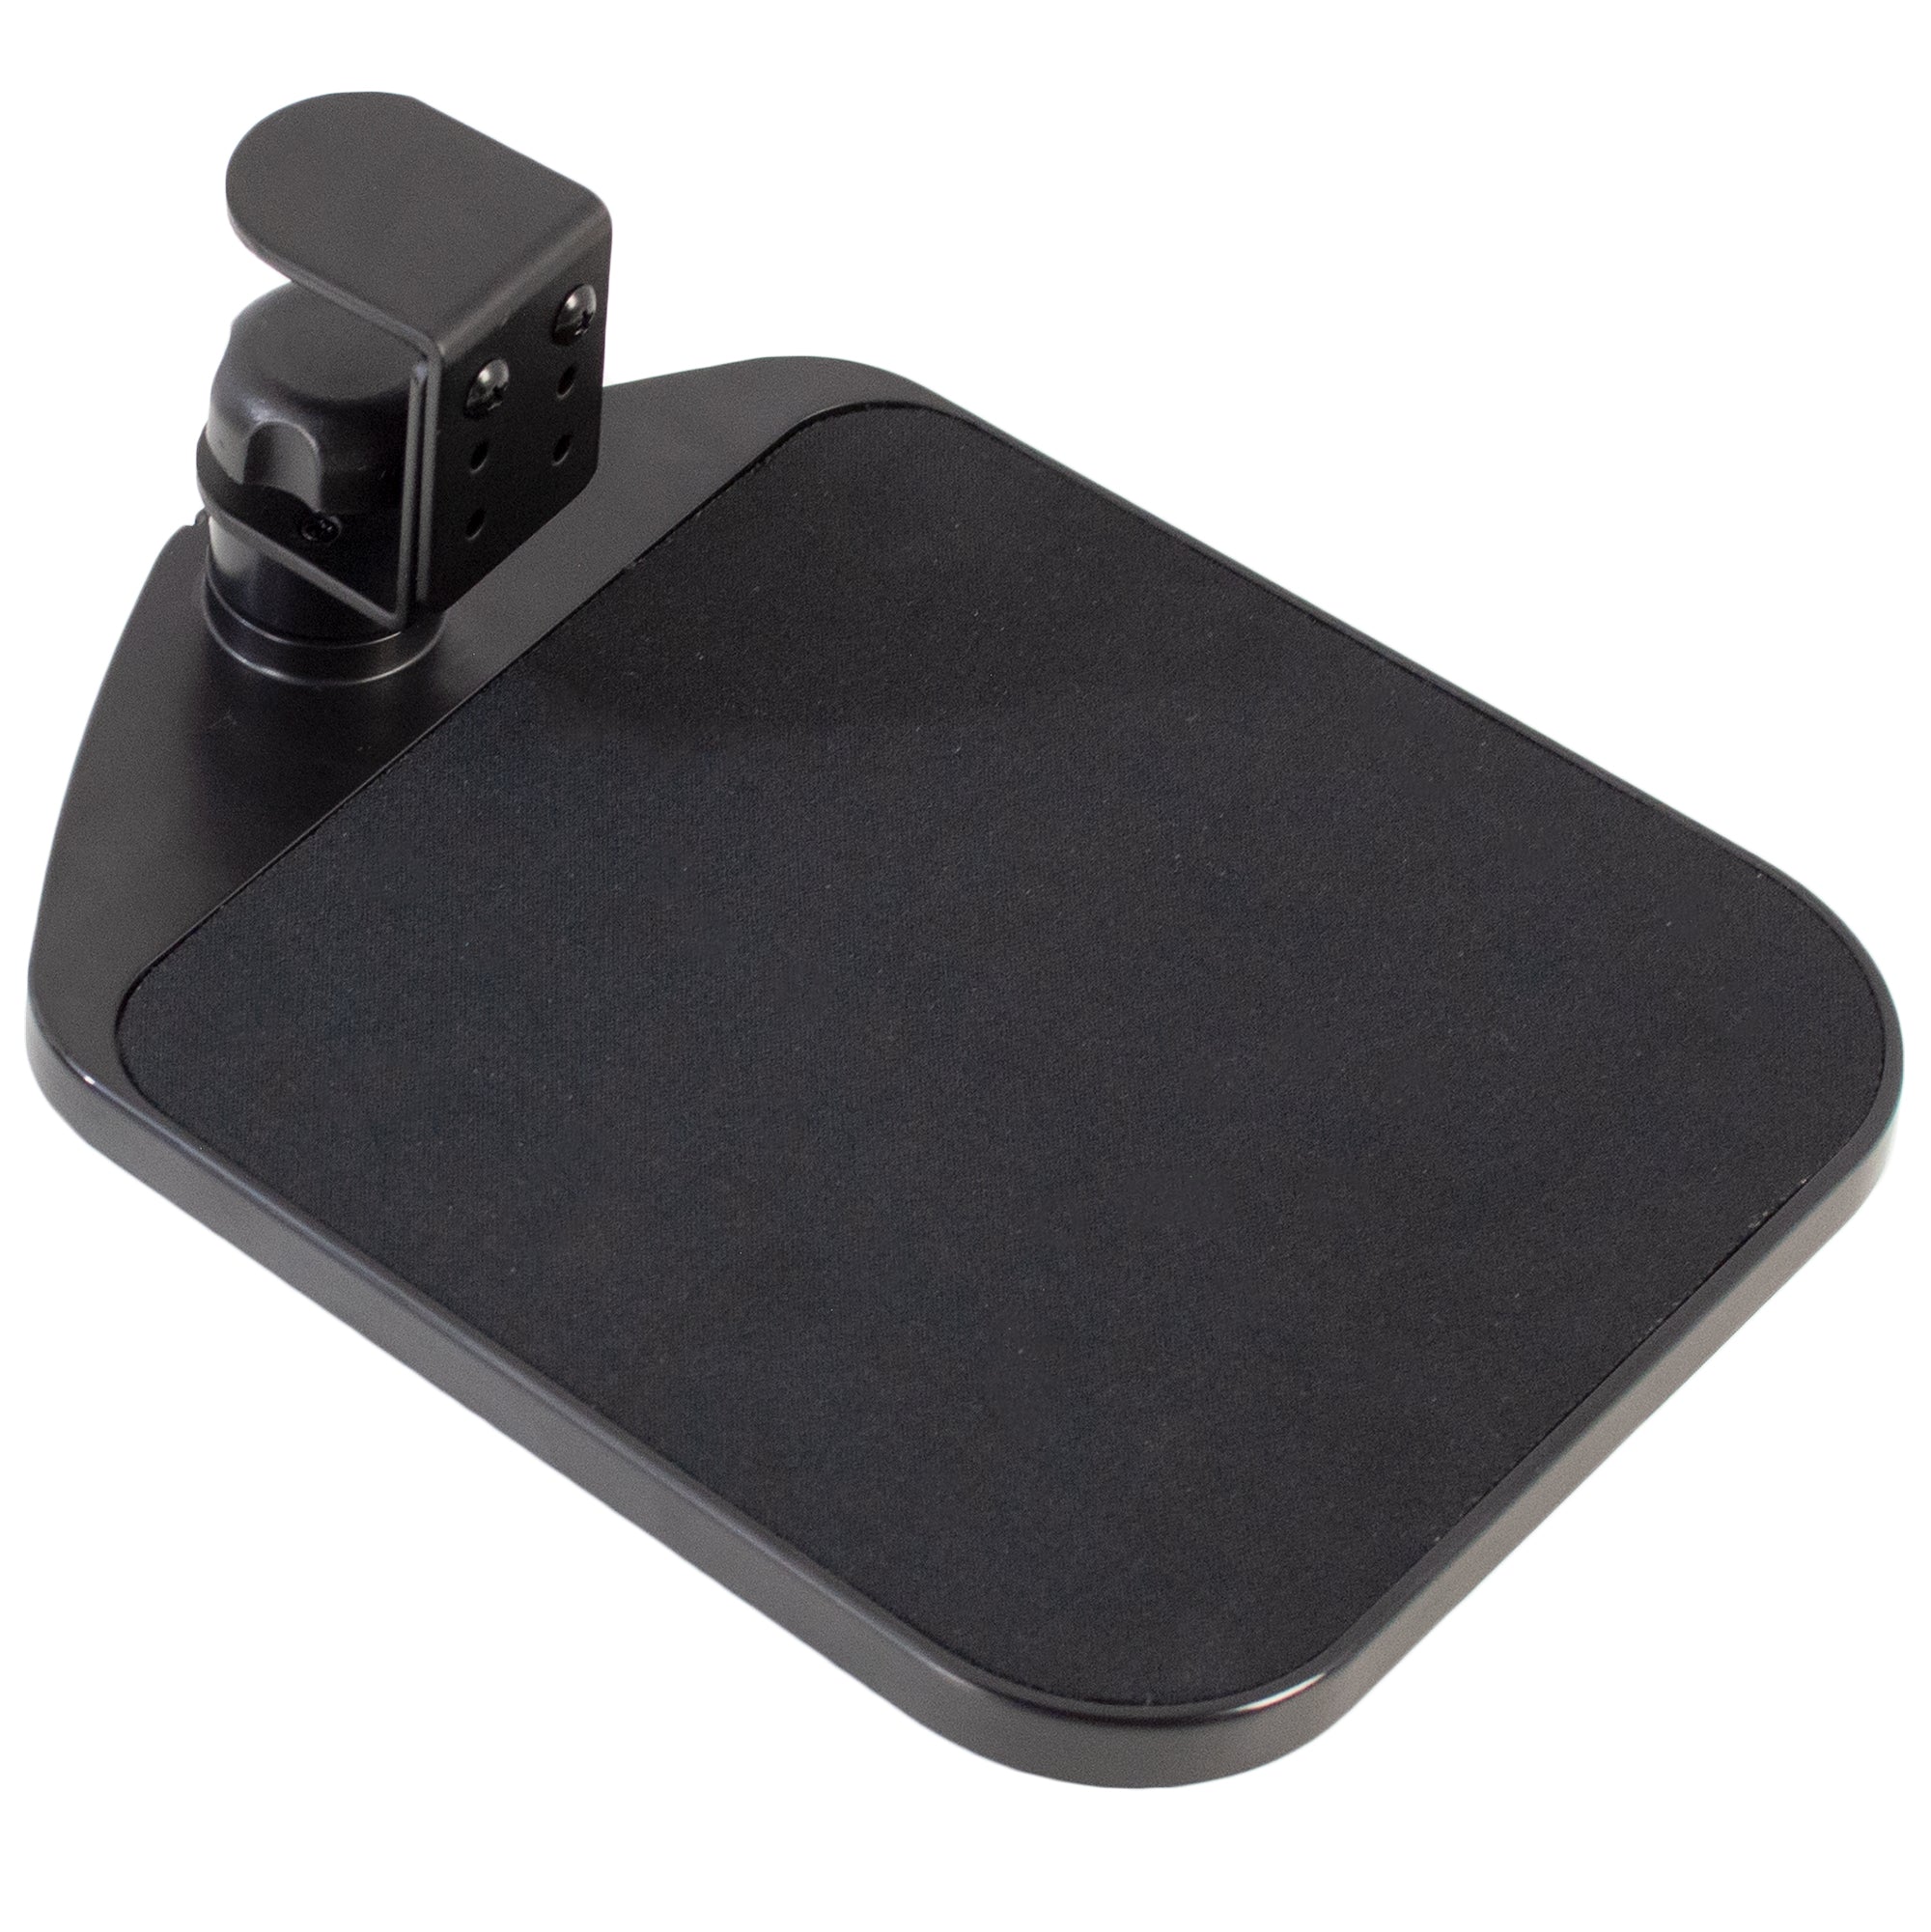 This pocket-sized phone holder mounts to airplane tray tables